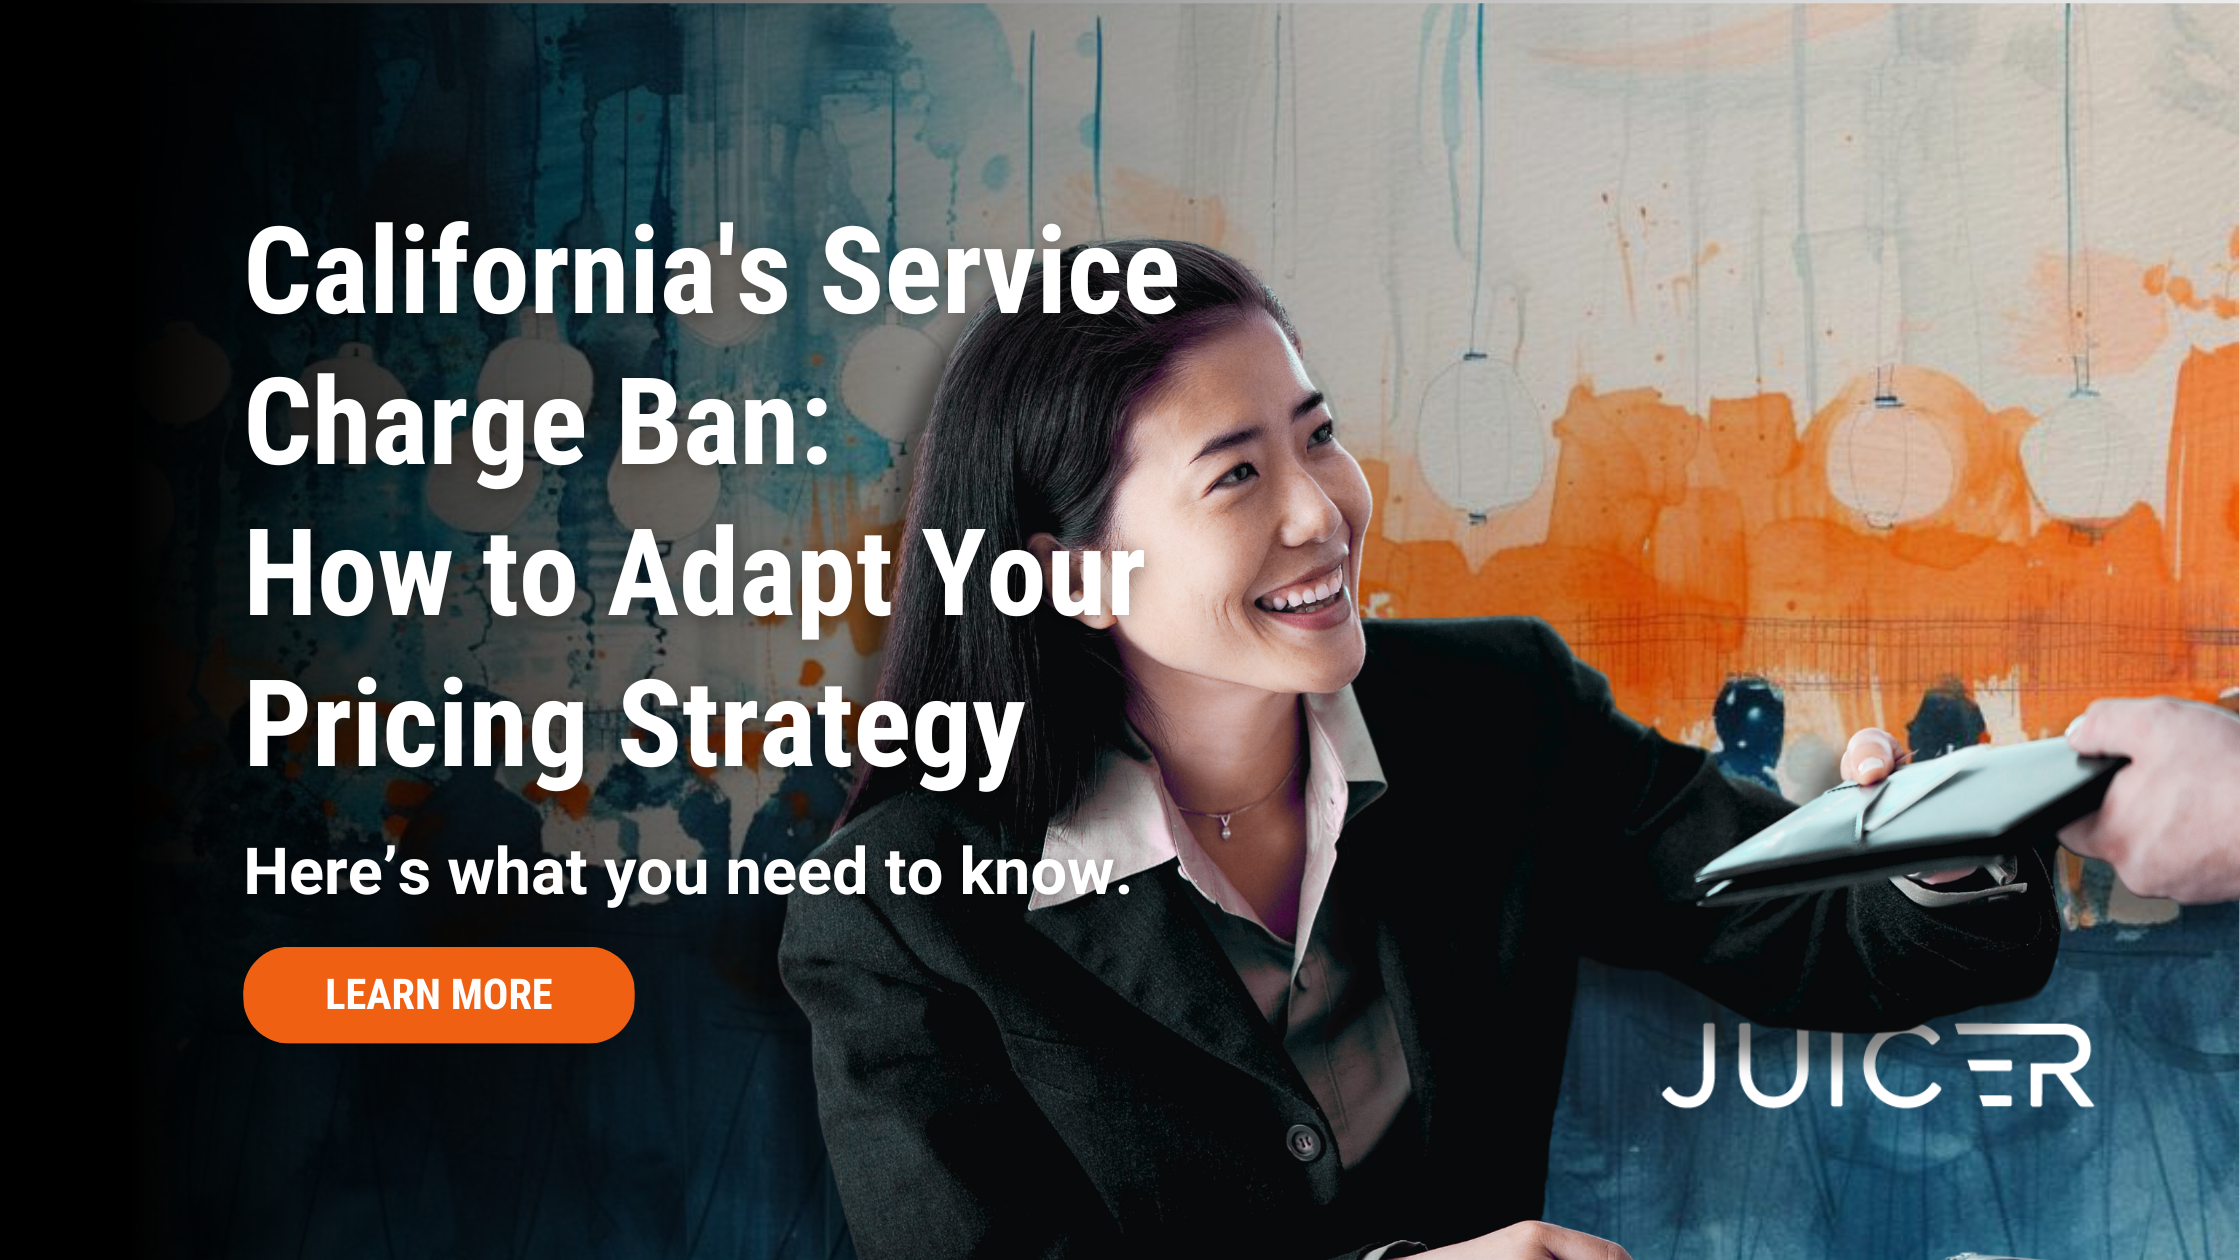 California's Service Charge Ban: How to Adapt Your Restaurant Pricing Strategy